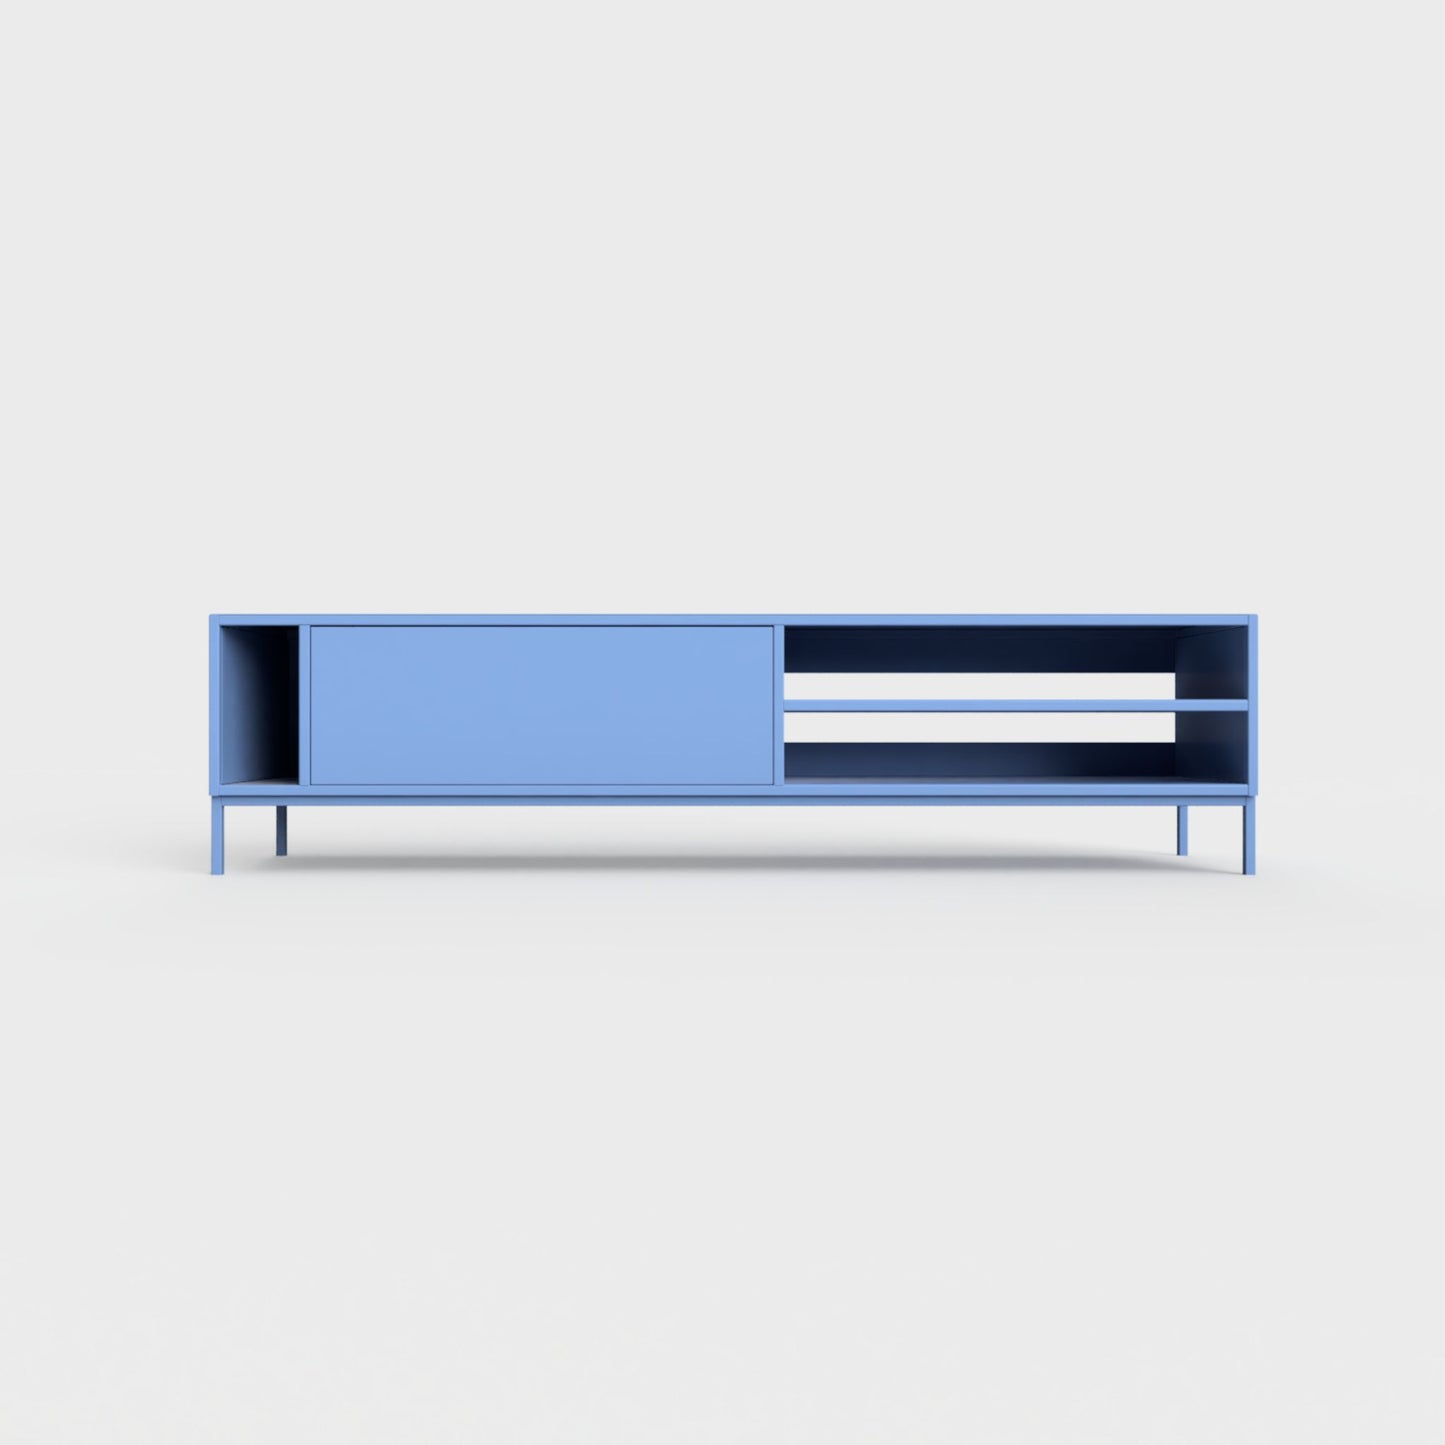 Prunus 03 Lowboard in sky blue color, powder-coated steel, elegant and modern piece of furniture for your living room